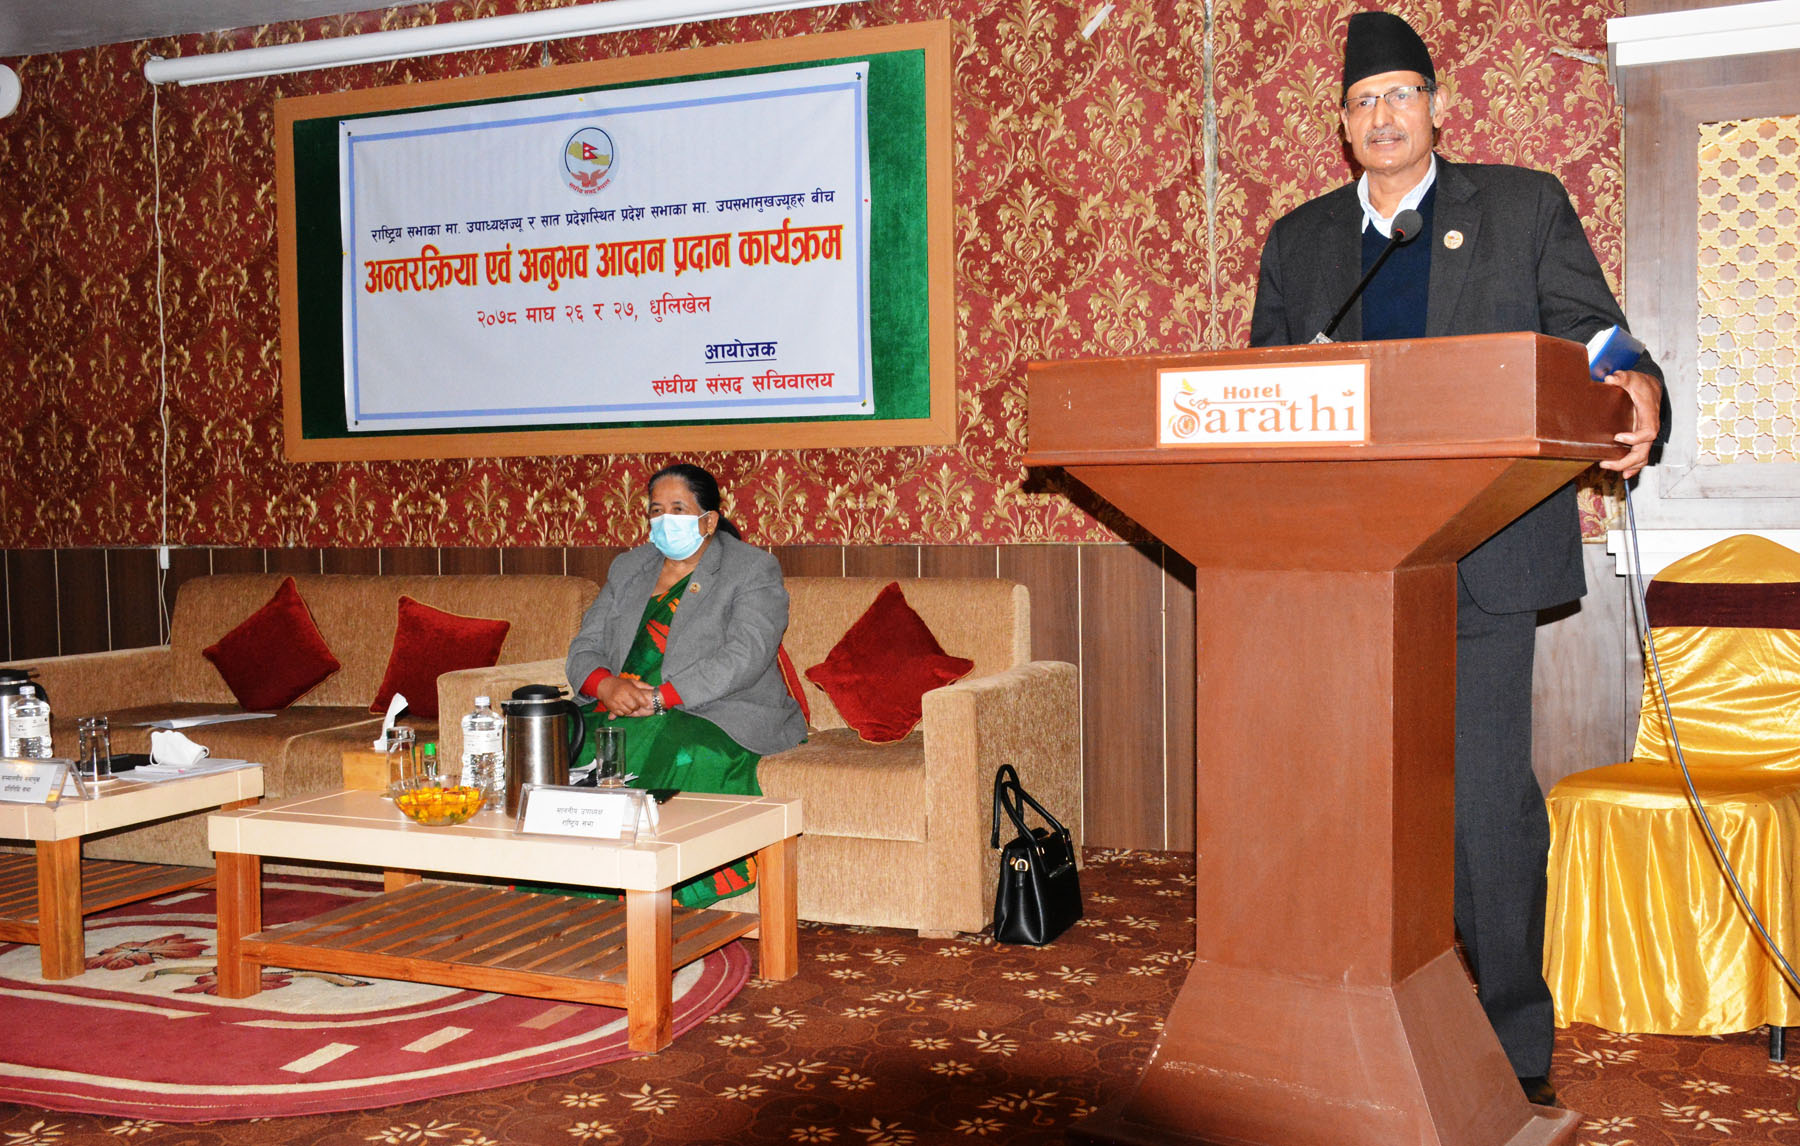 efforts-on-to-make-parliament-lively-and-people-oriented-speaker-sapkota